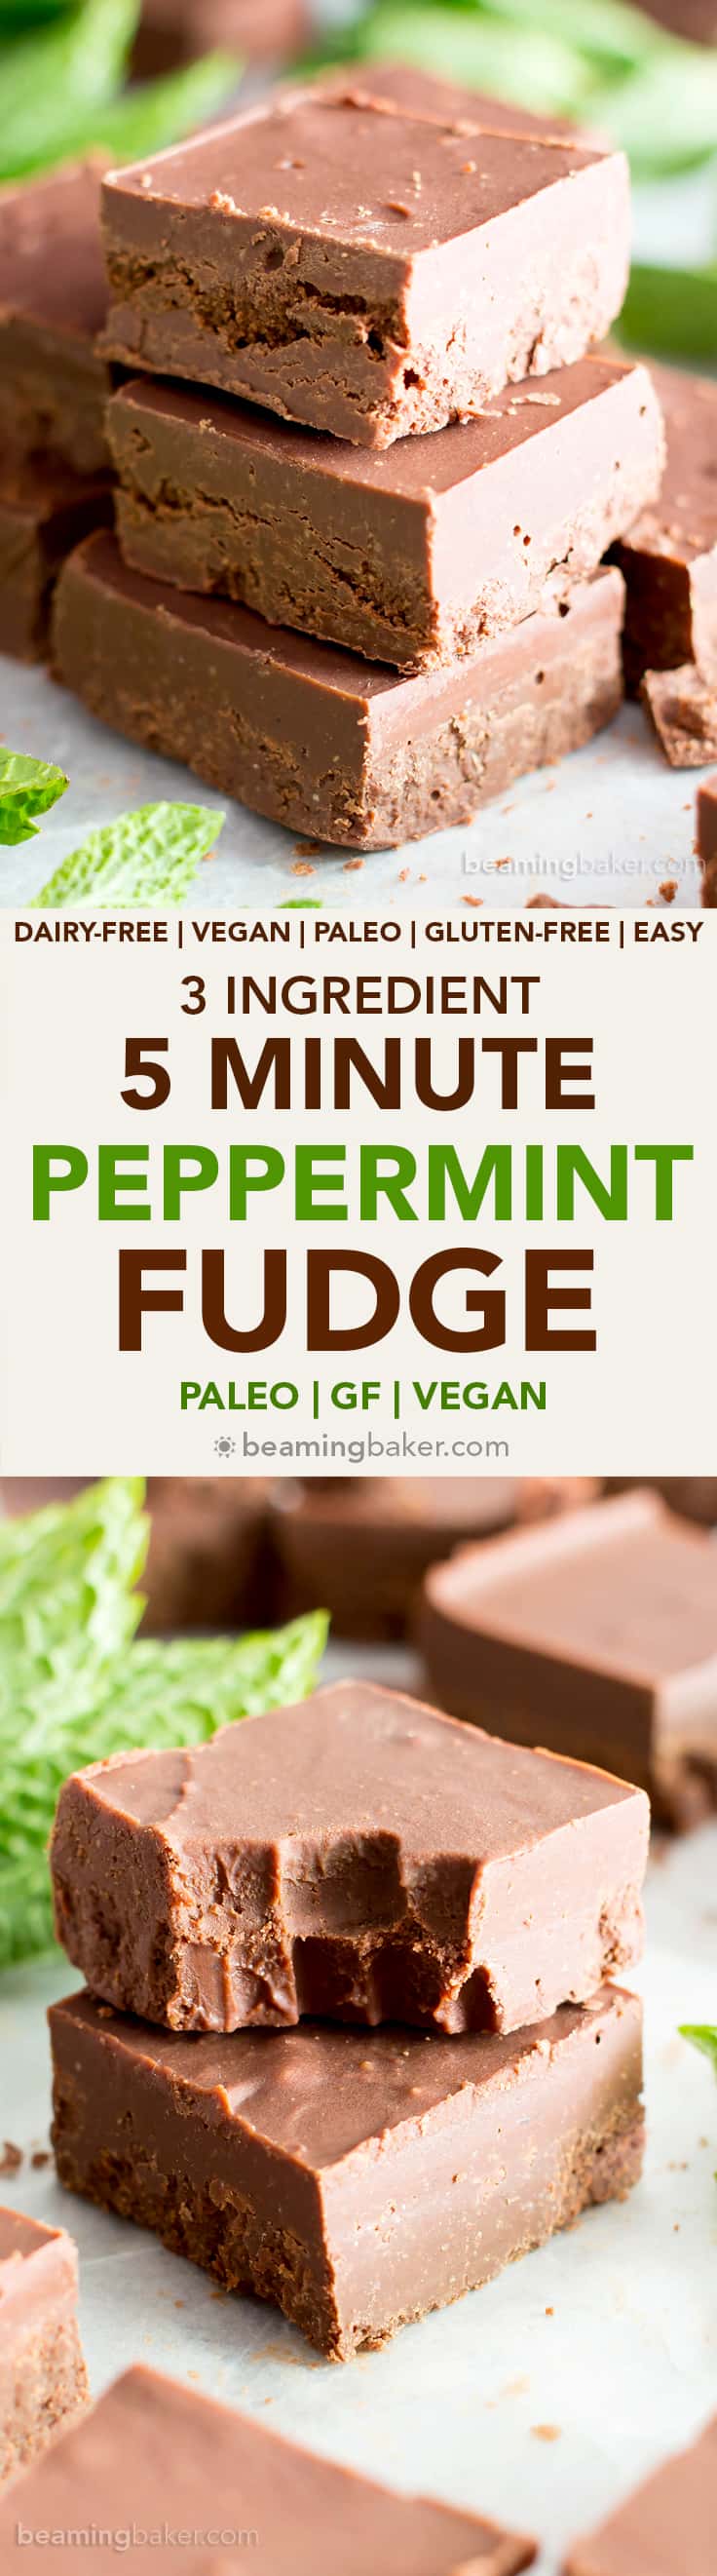 5 Minute Easy Peppermint Fudge (V, GF): a 3 ingredient recipe for creamy, thick, indulgent chocolatey fudge squares made with healthy ingredients! Takes just 5 minutes to prep, the rest is just freezing time! #Paleo #Vegan #GlutenFree #DairyFree #HealthyHolidayDesserts